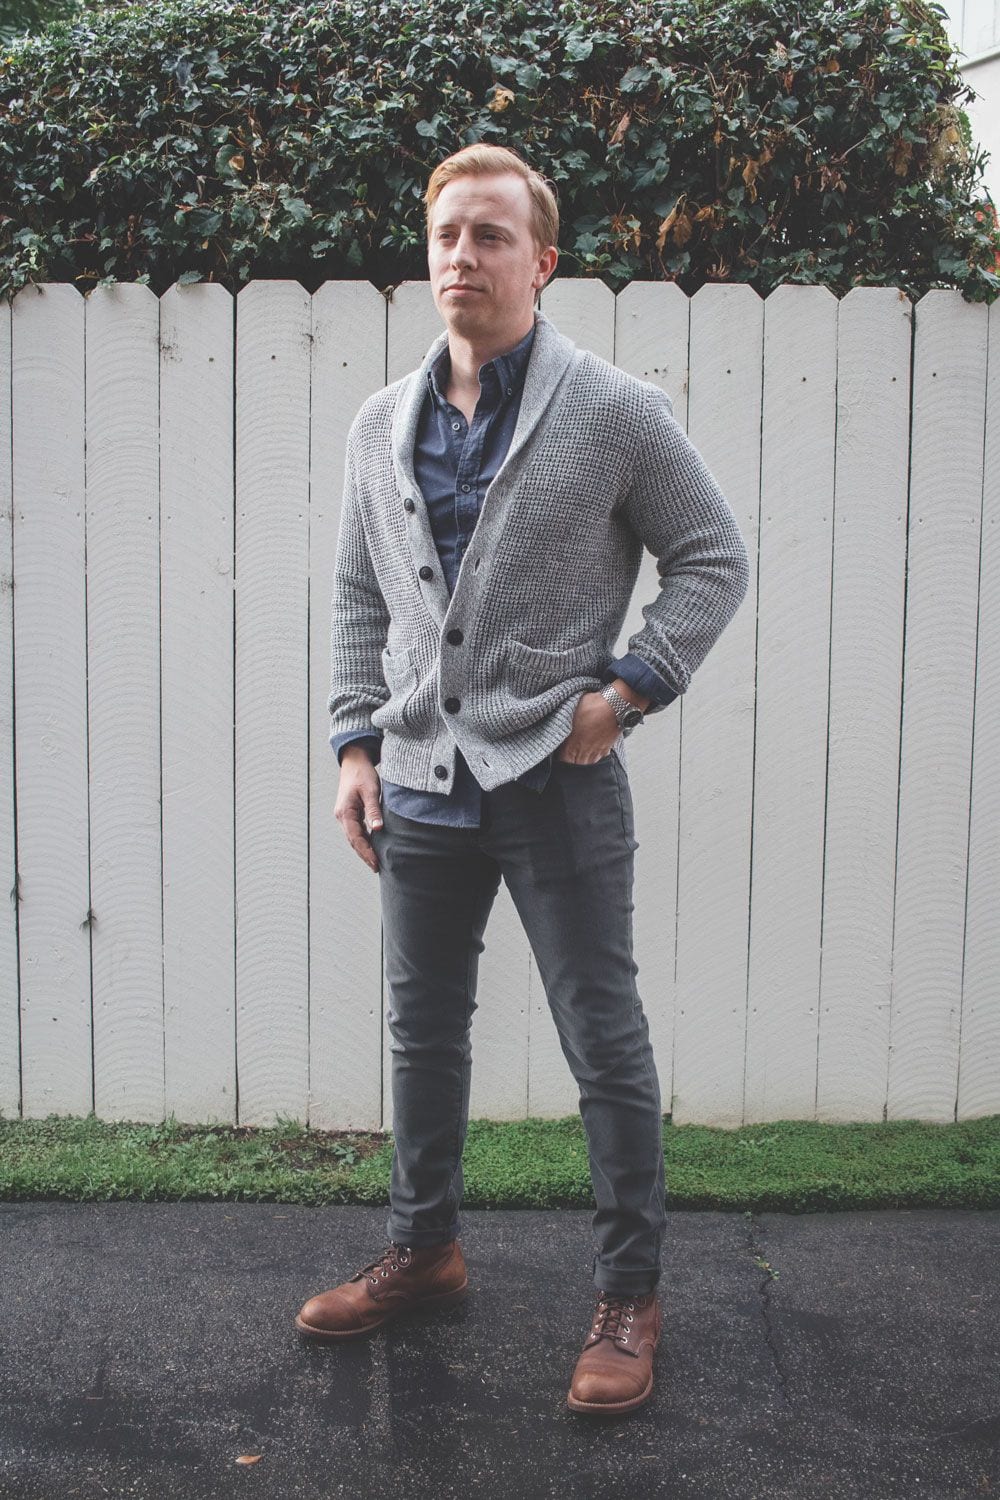 How To Wear Grey Jeans - 20 Outfits With Grey Jeans for Men